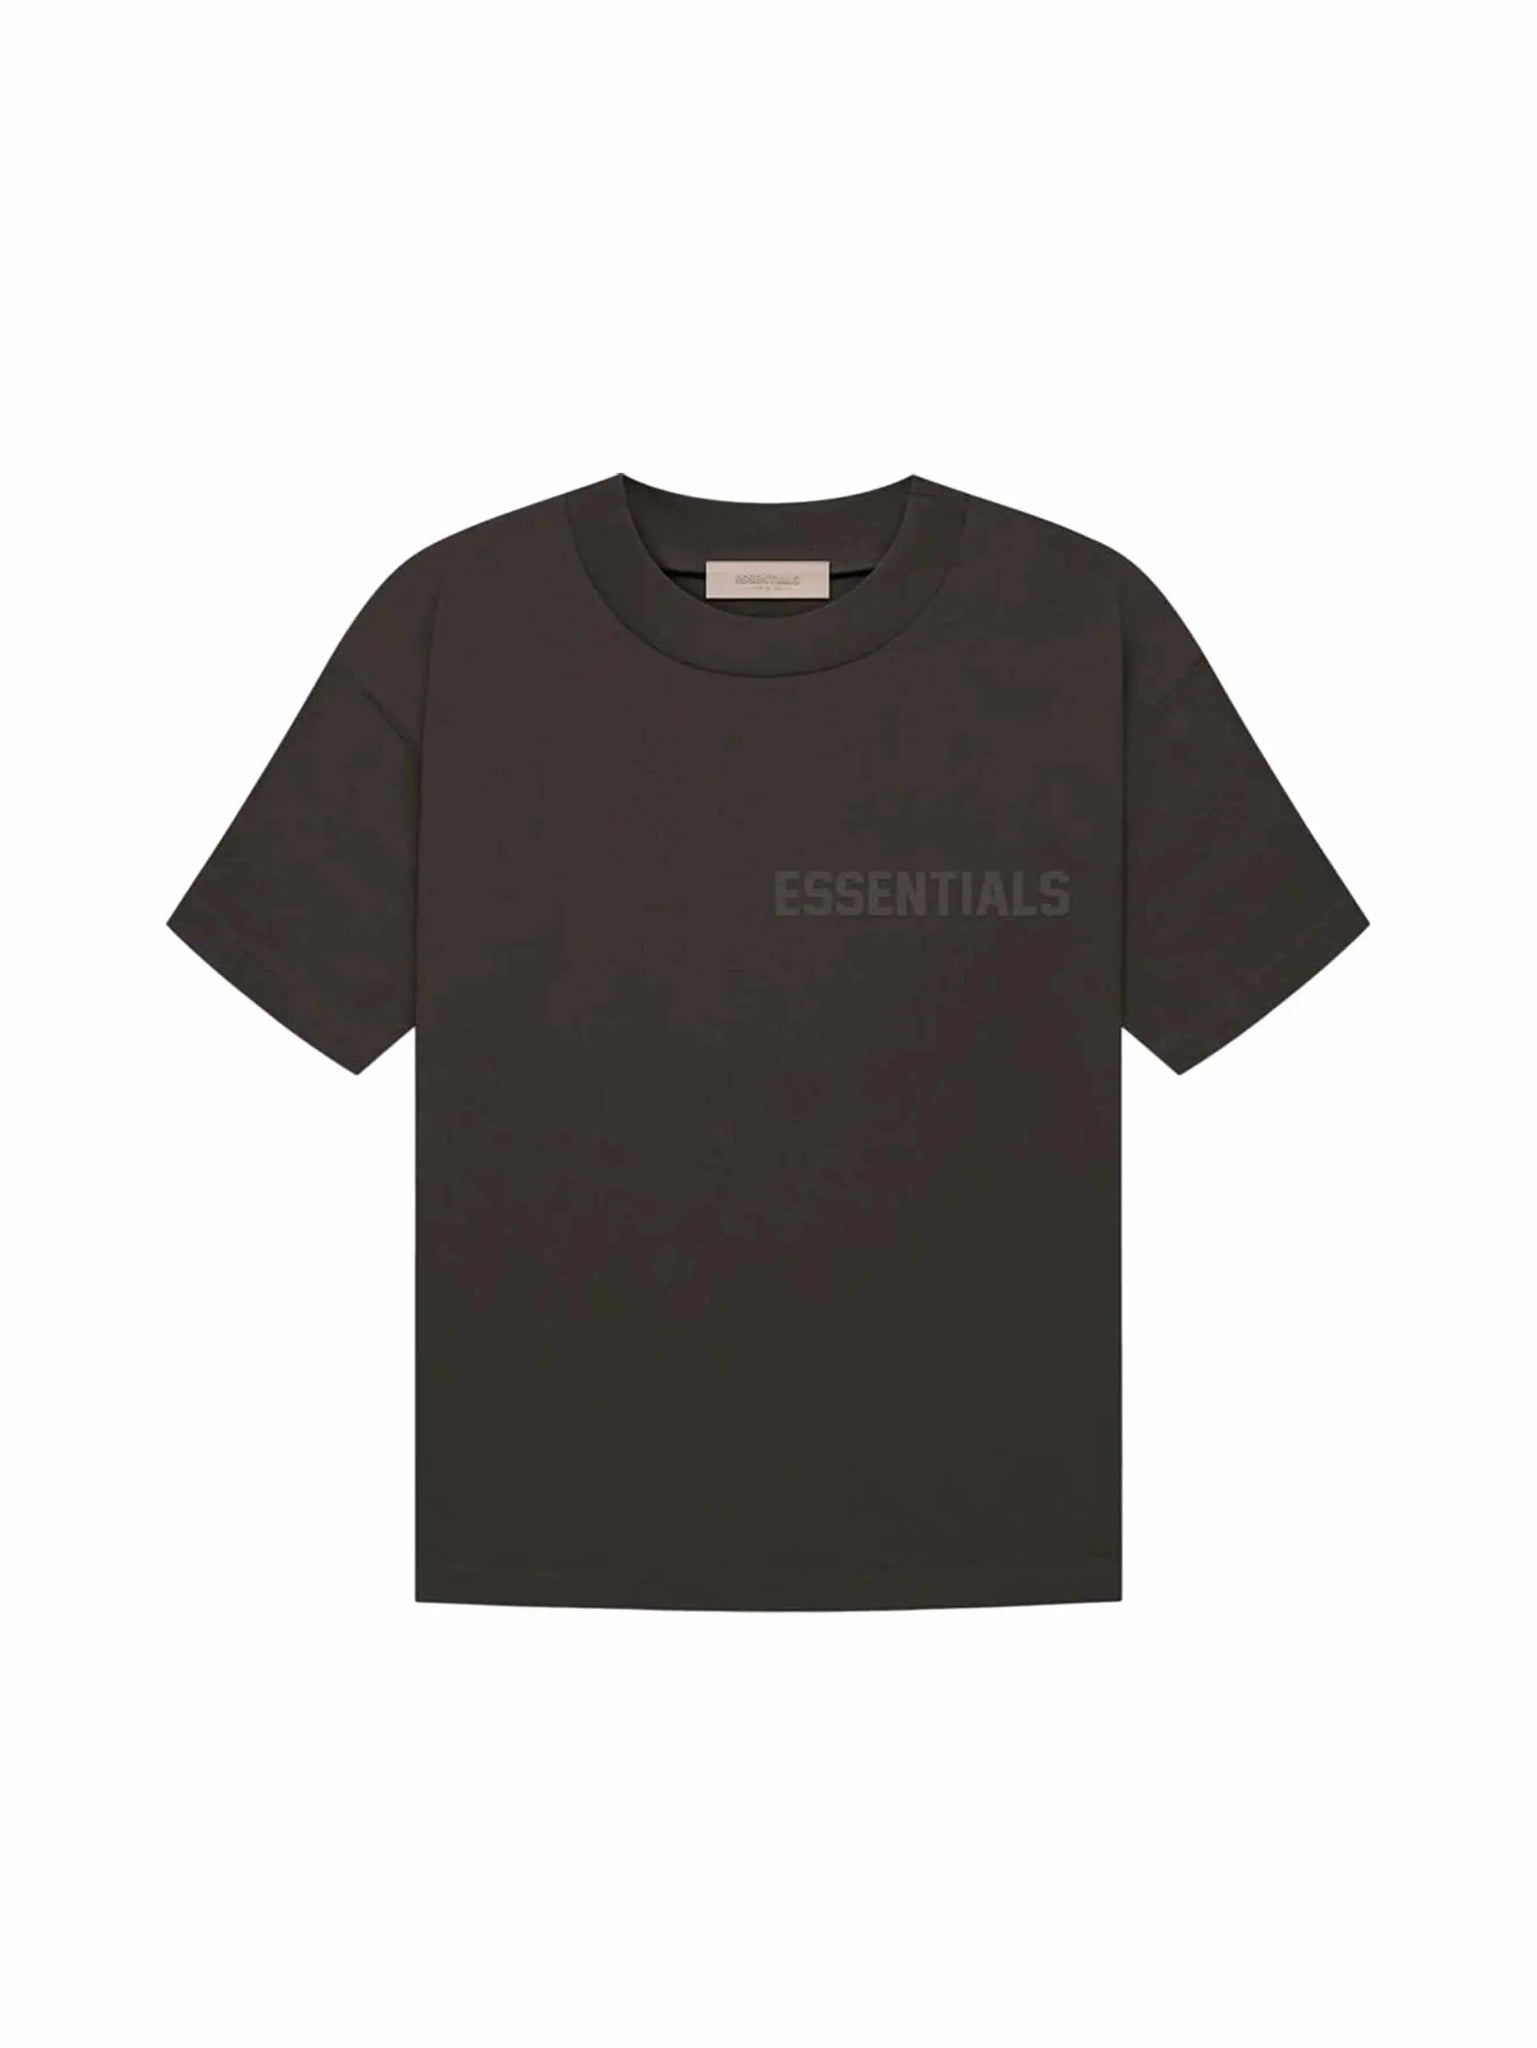 Fear of God Essentials T-shirt Off Black in Auckland, New Zealand - Shop name